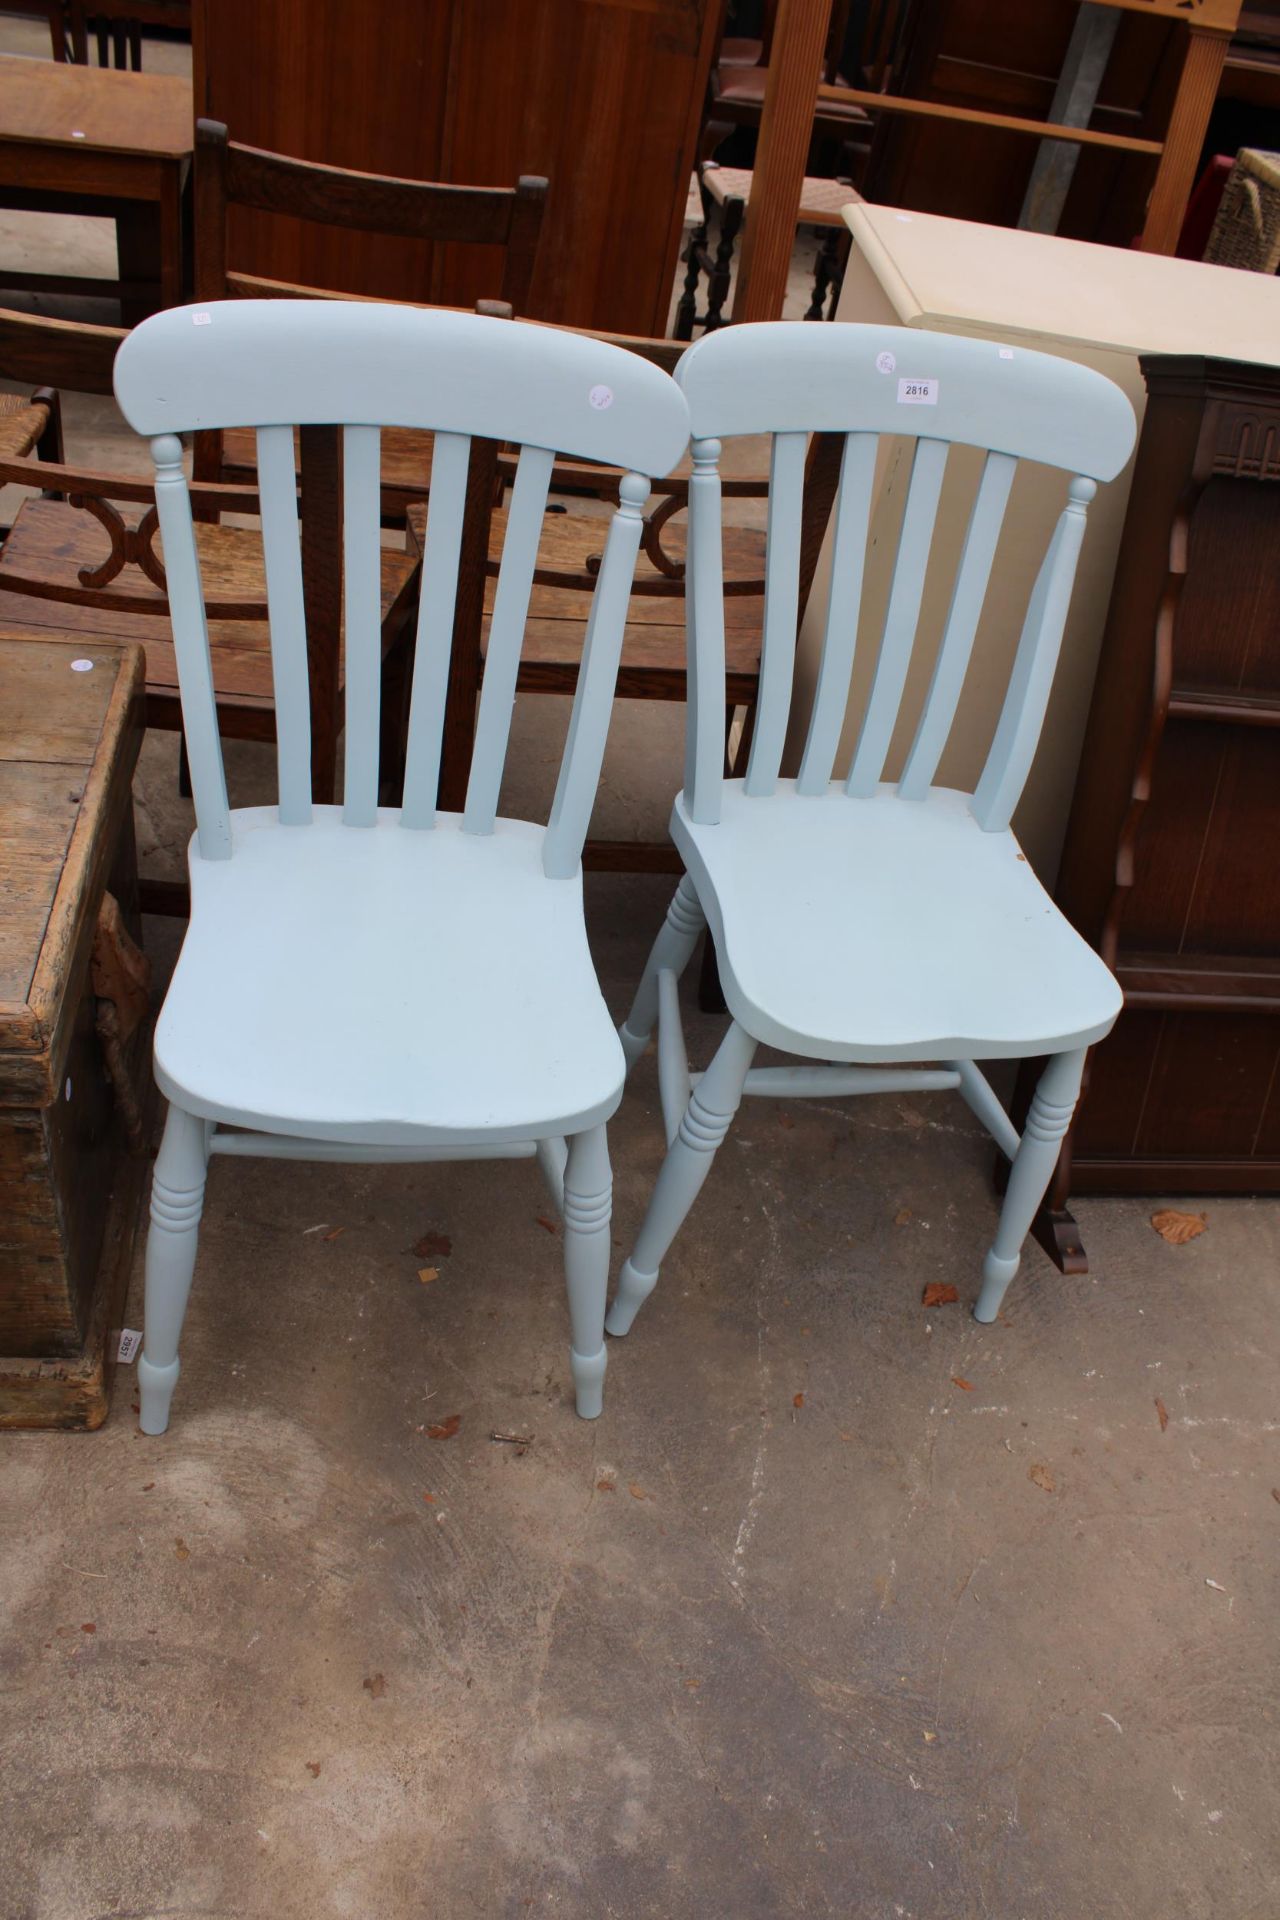 A PAIR OF PAINTED VICTORIAN KITCHEN CHAIRS